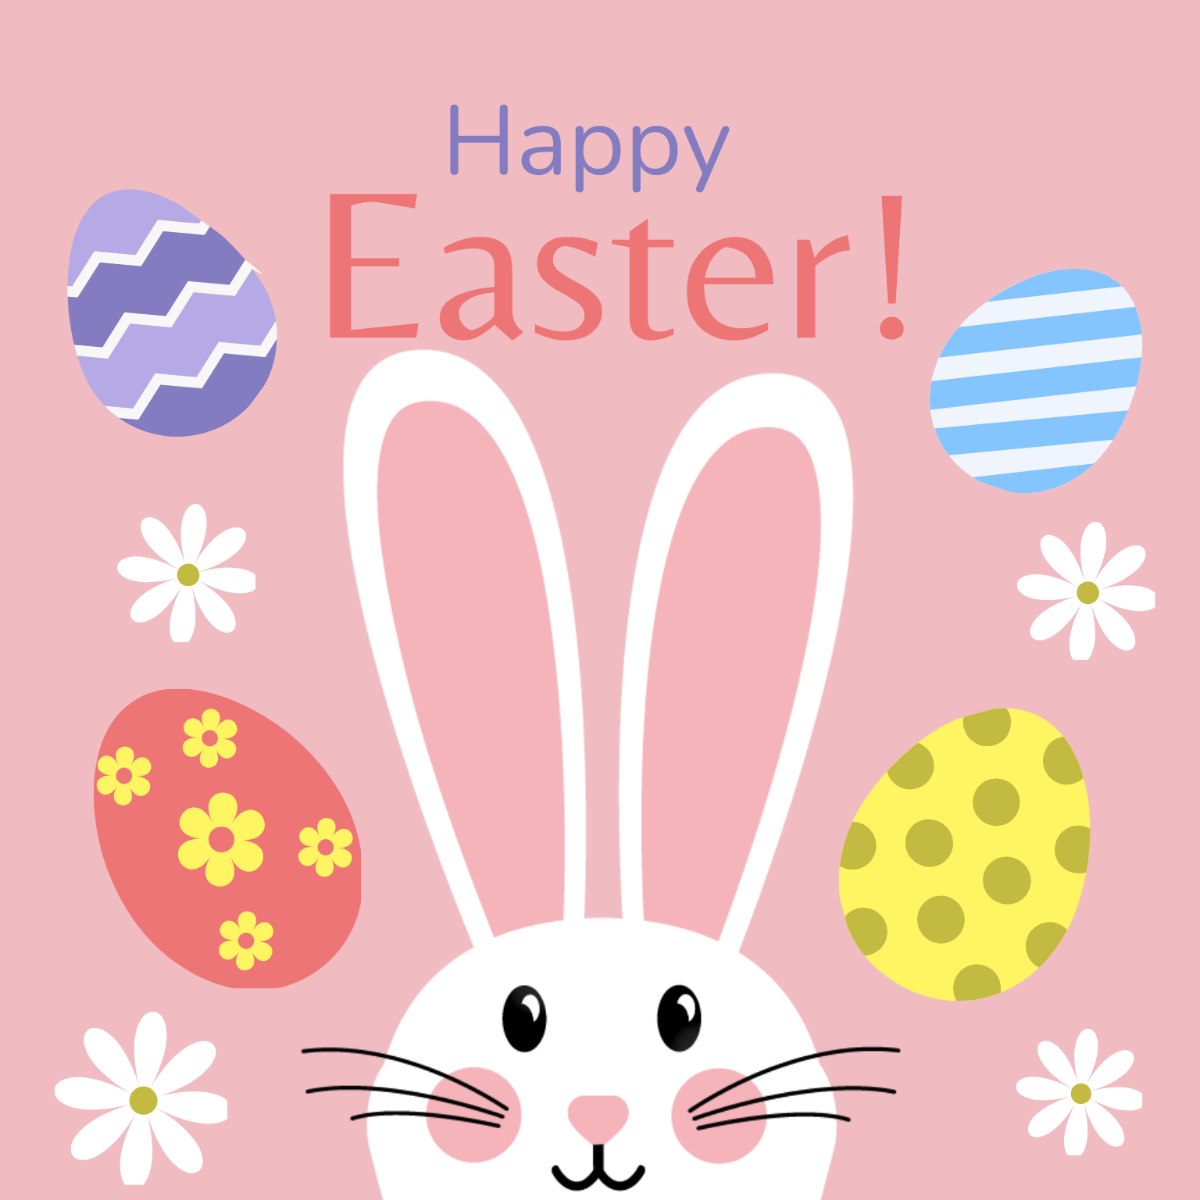 Happy Easter Illustration Template